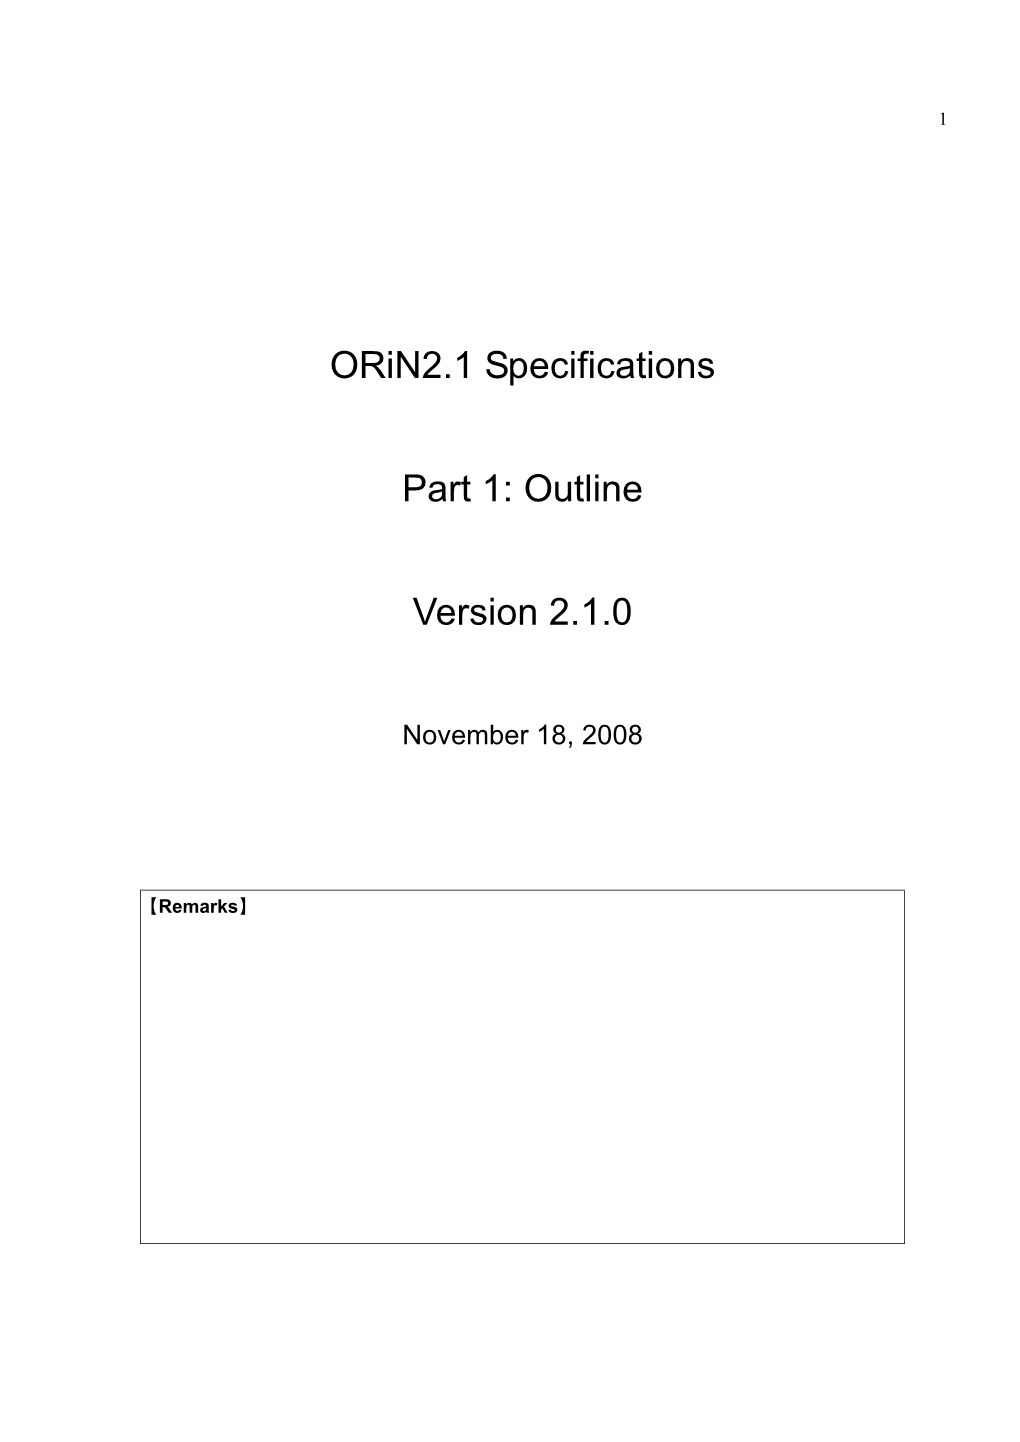 Orin2.1 Specifications Part 1: Outline Version 2.1.0